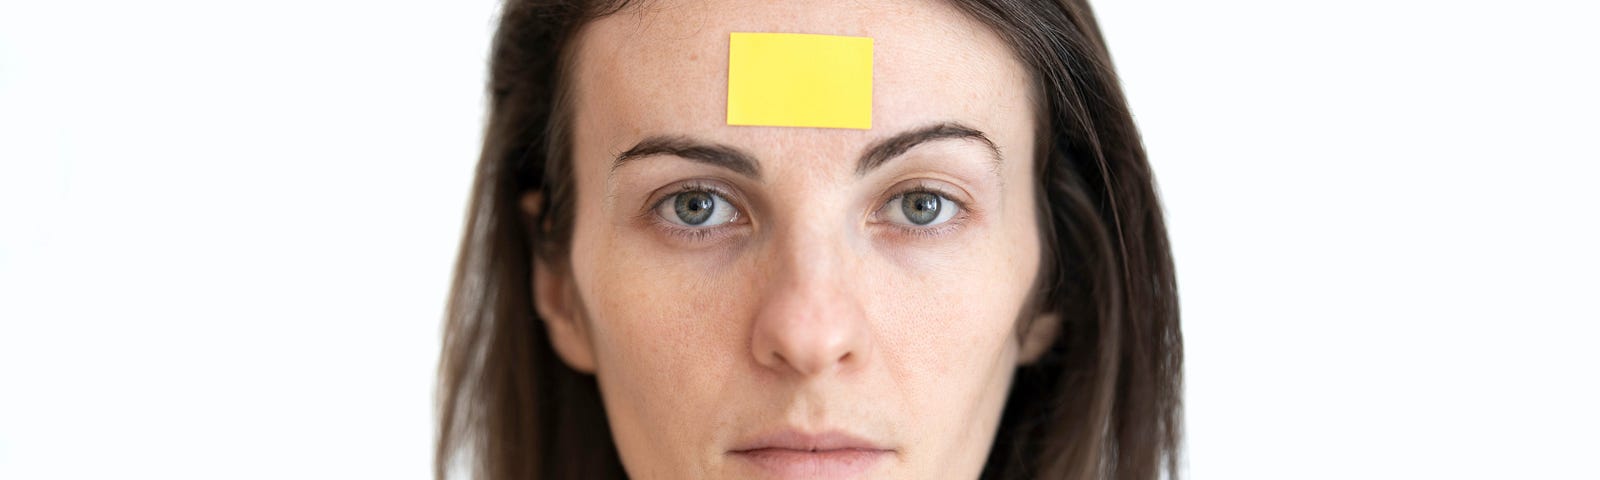 woman with yellow label on her forehead